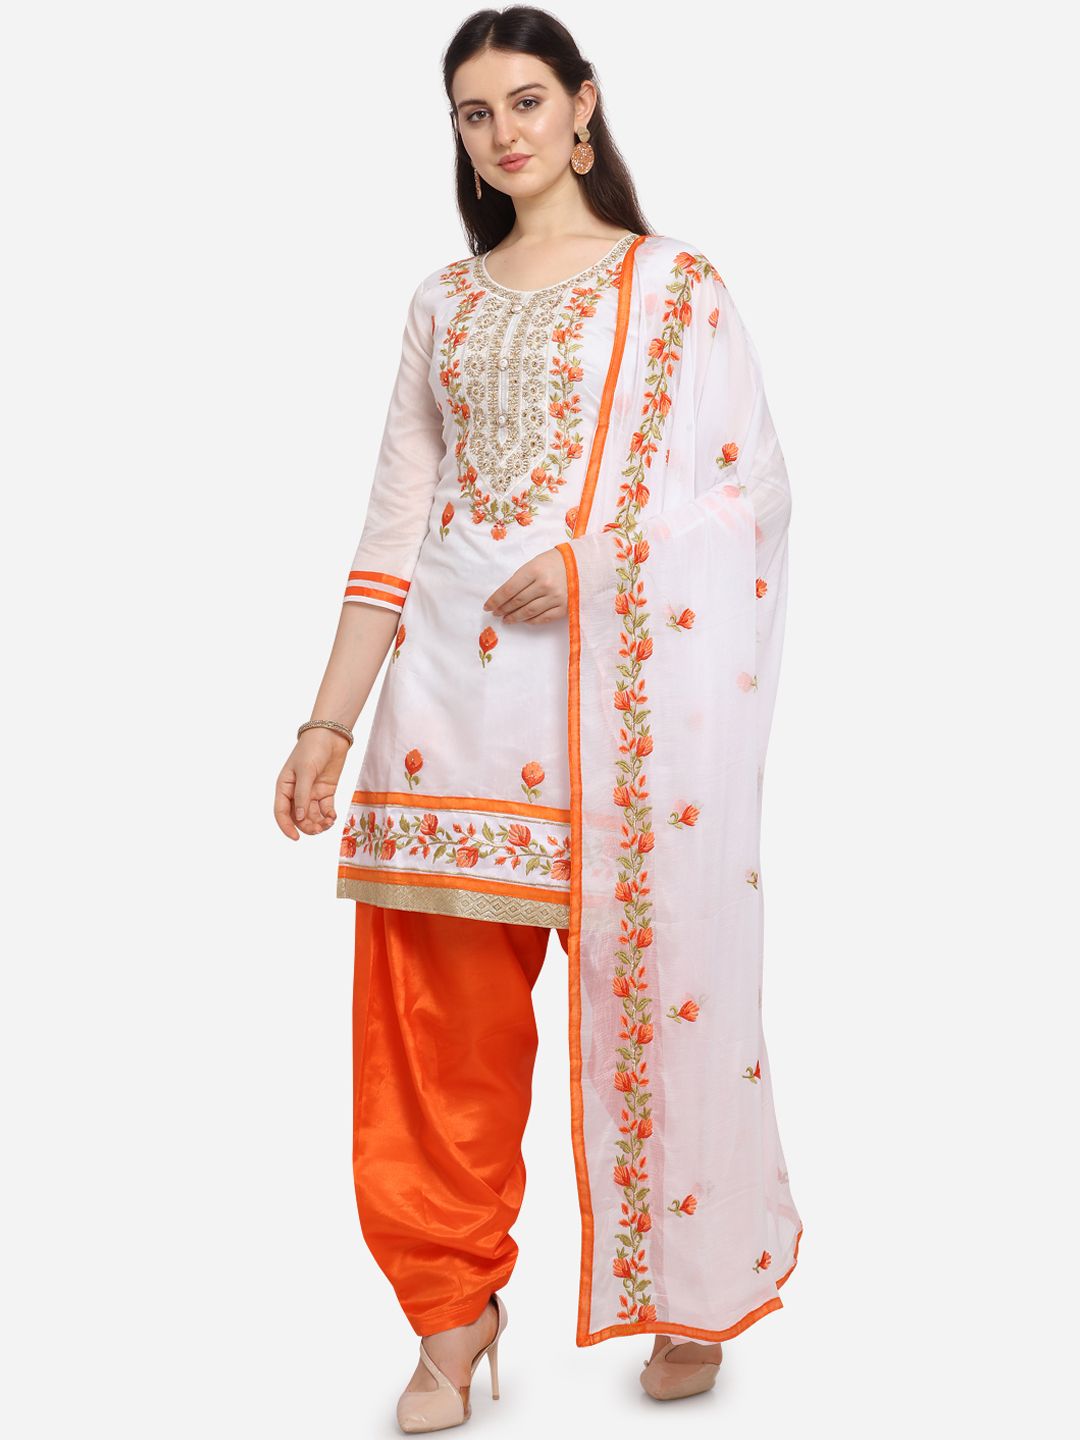 Ethnic Junction White & Orange Embroidered Unstitched Dress Material Price in India